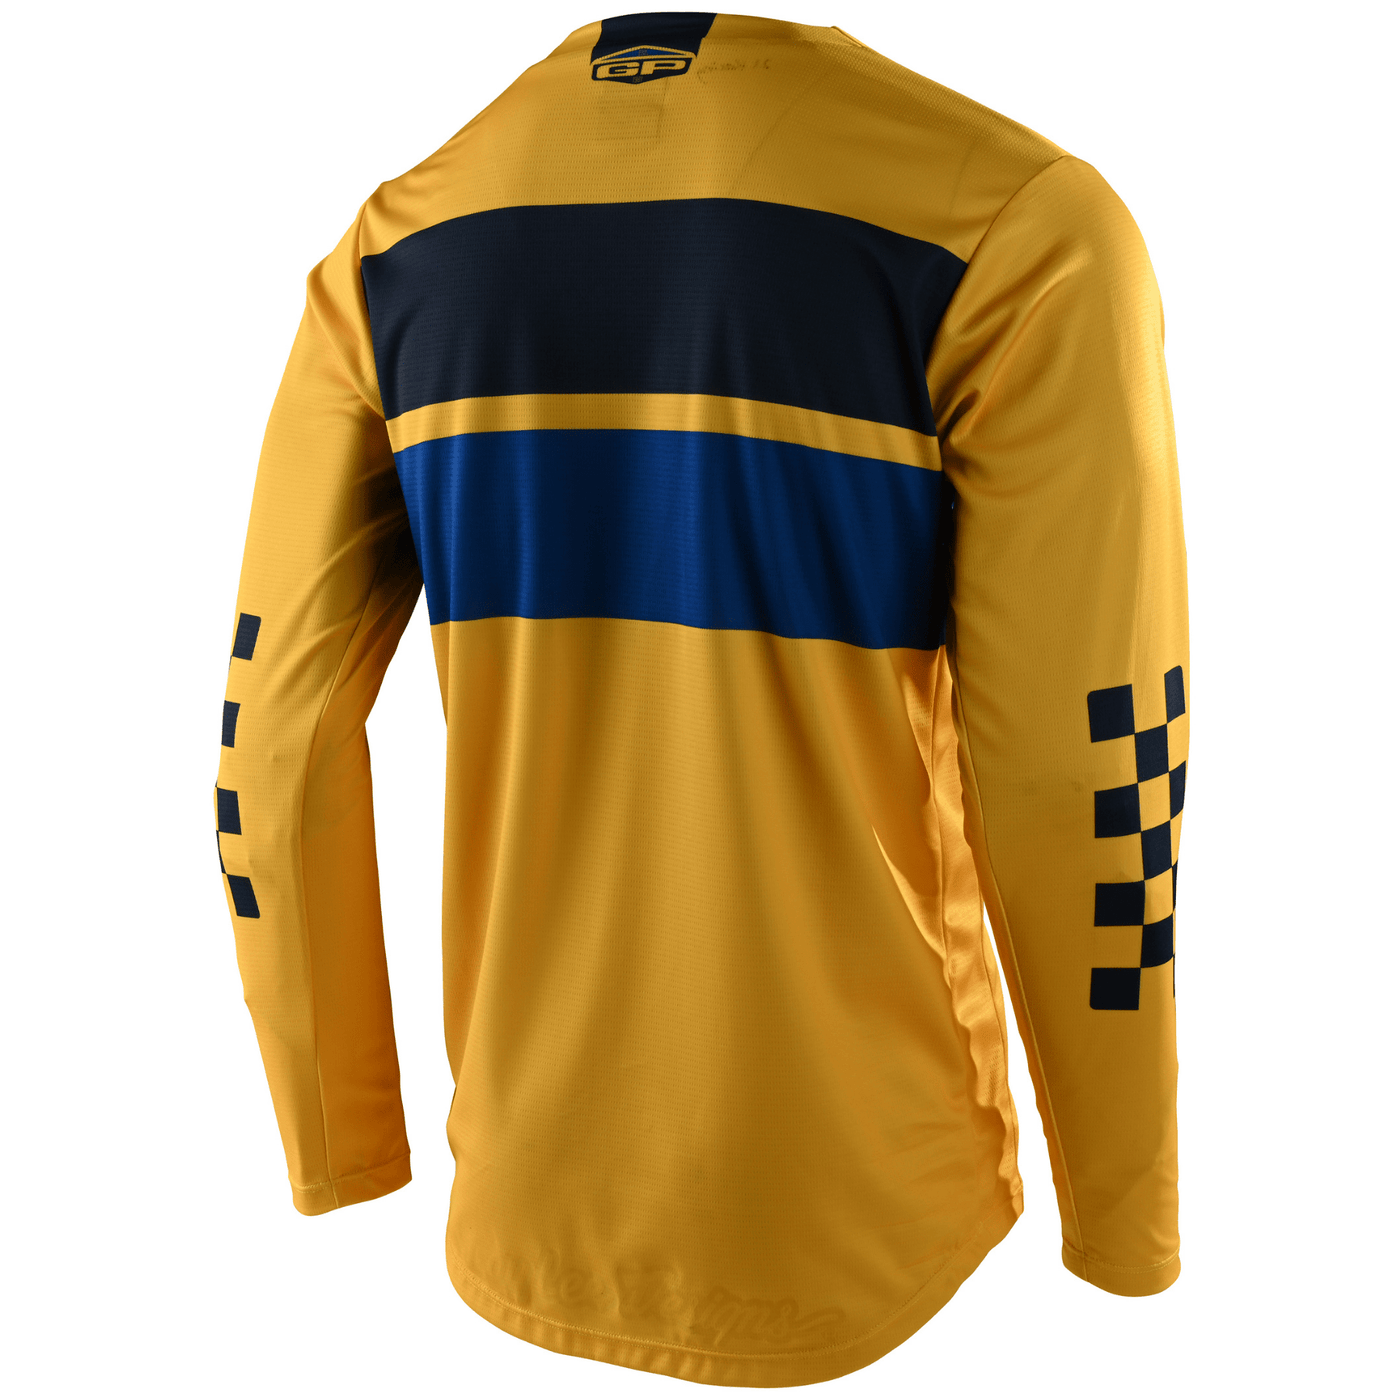 Troy Lee Designs GP Jersey Racing Stripe - Yellow 8Lines Shop - Fast Shipping